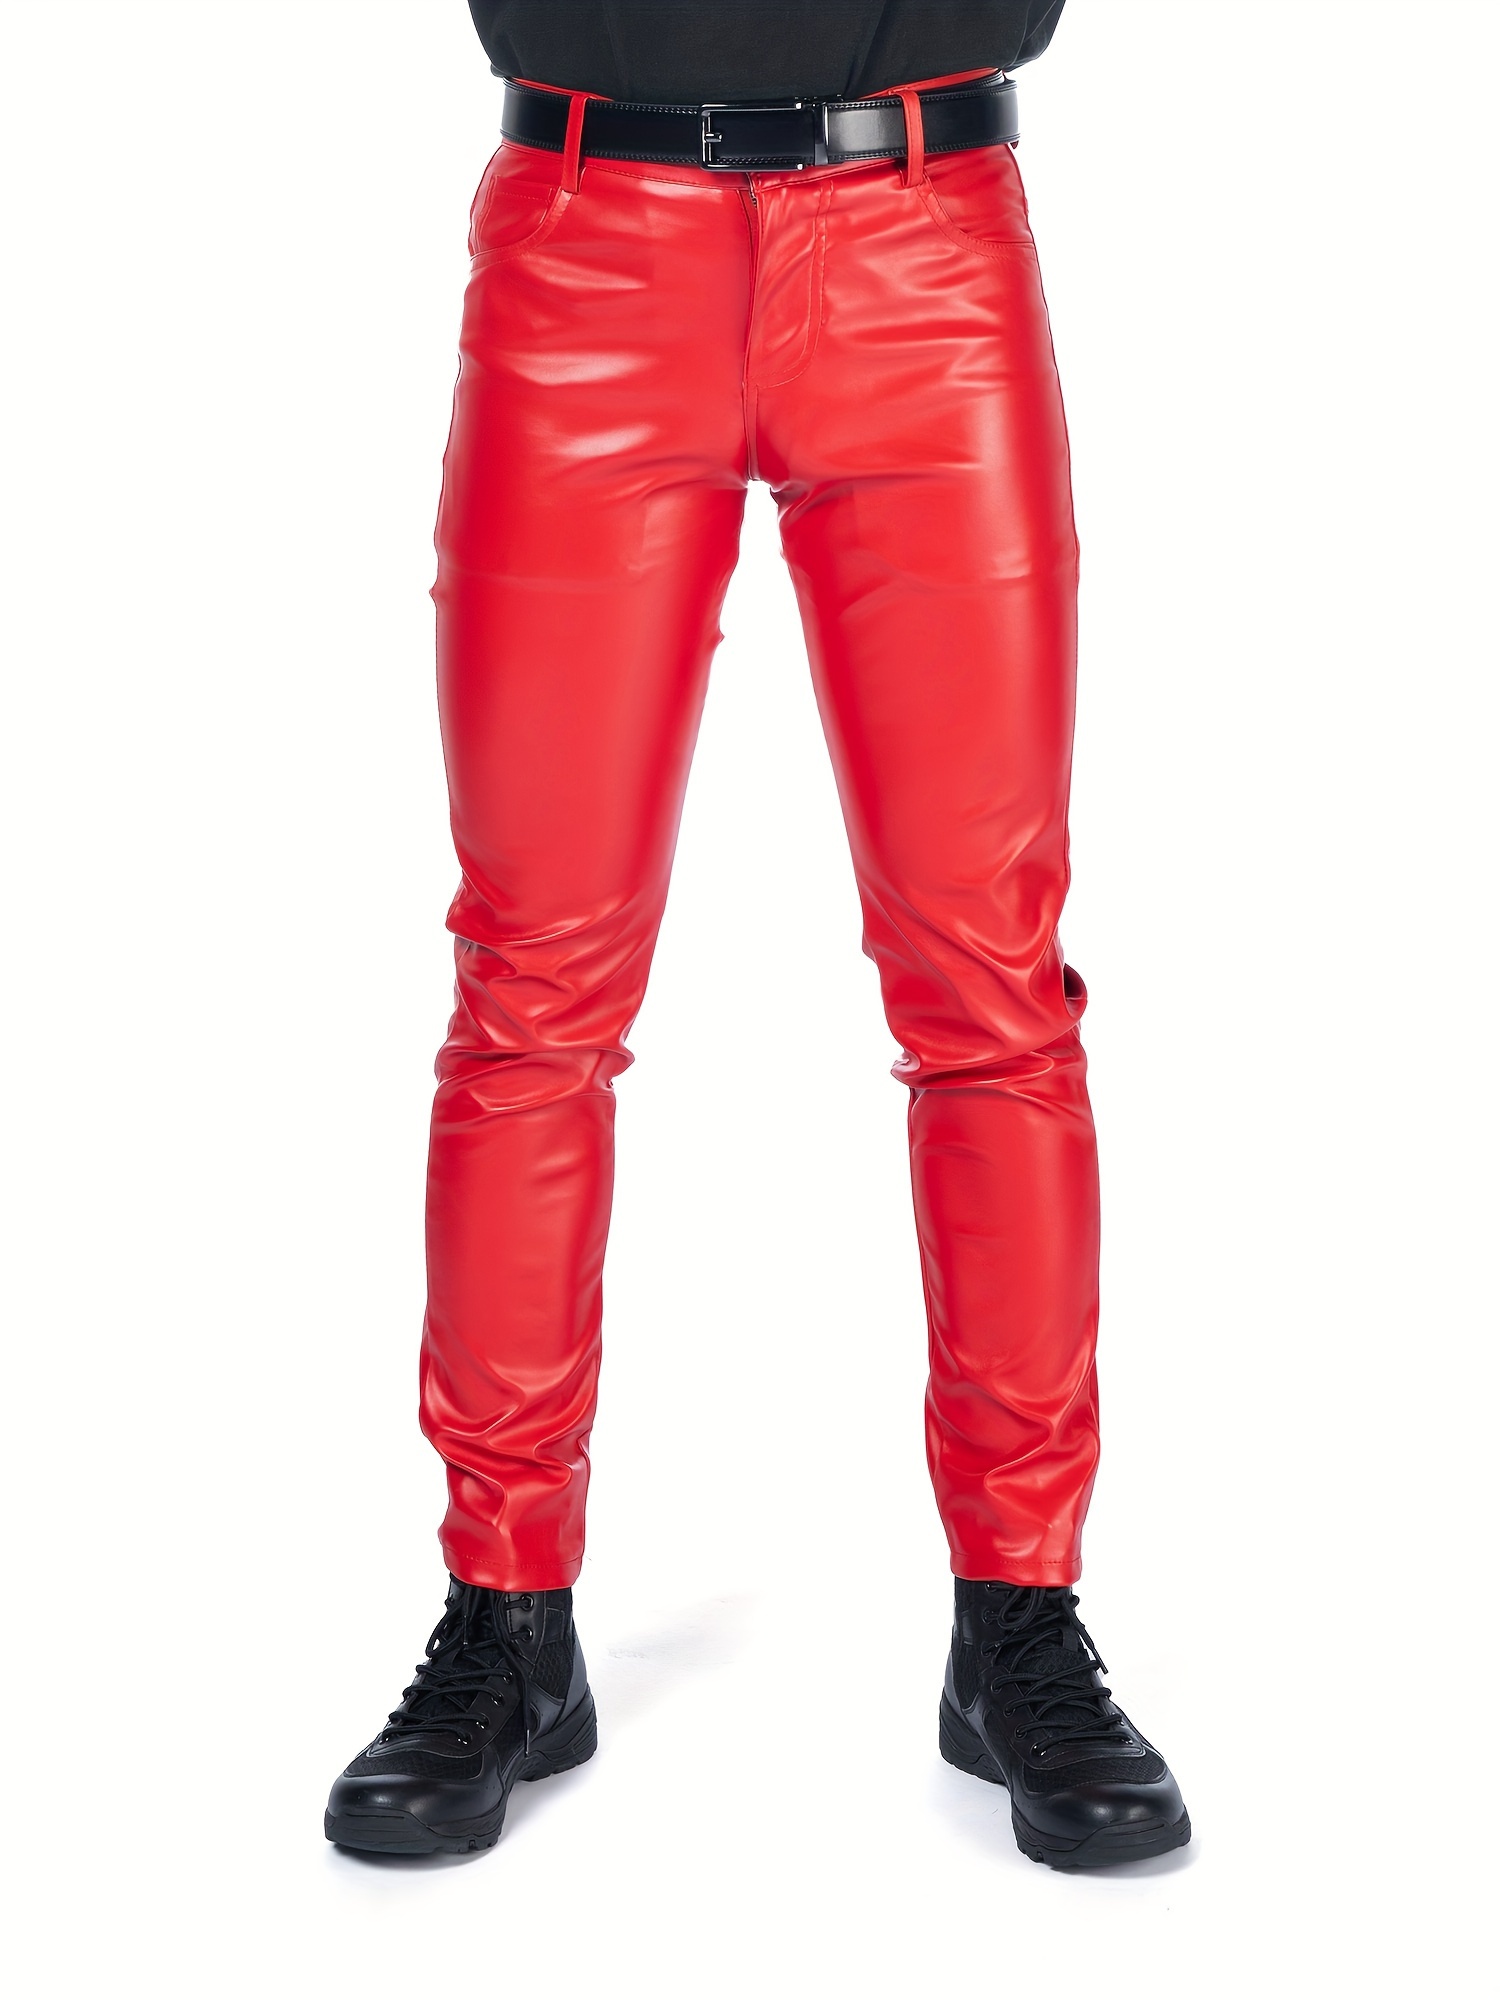 Faleave Men's Faux Leather Pants Skinny Stretch Black Red Slim Fit Suit  Pants(Red-30) at  Men's Clothing store